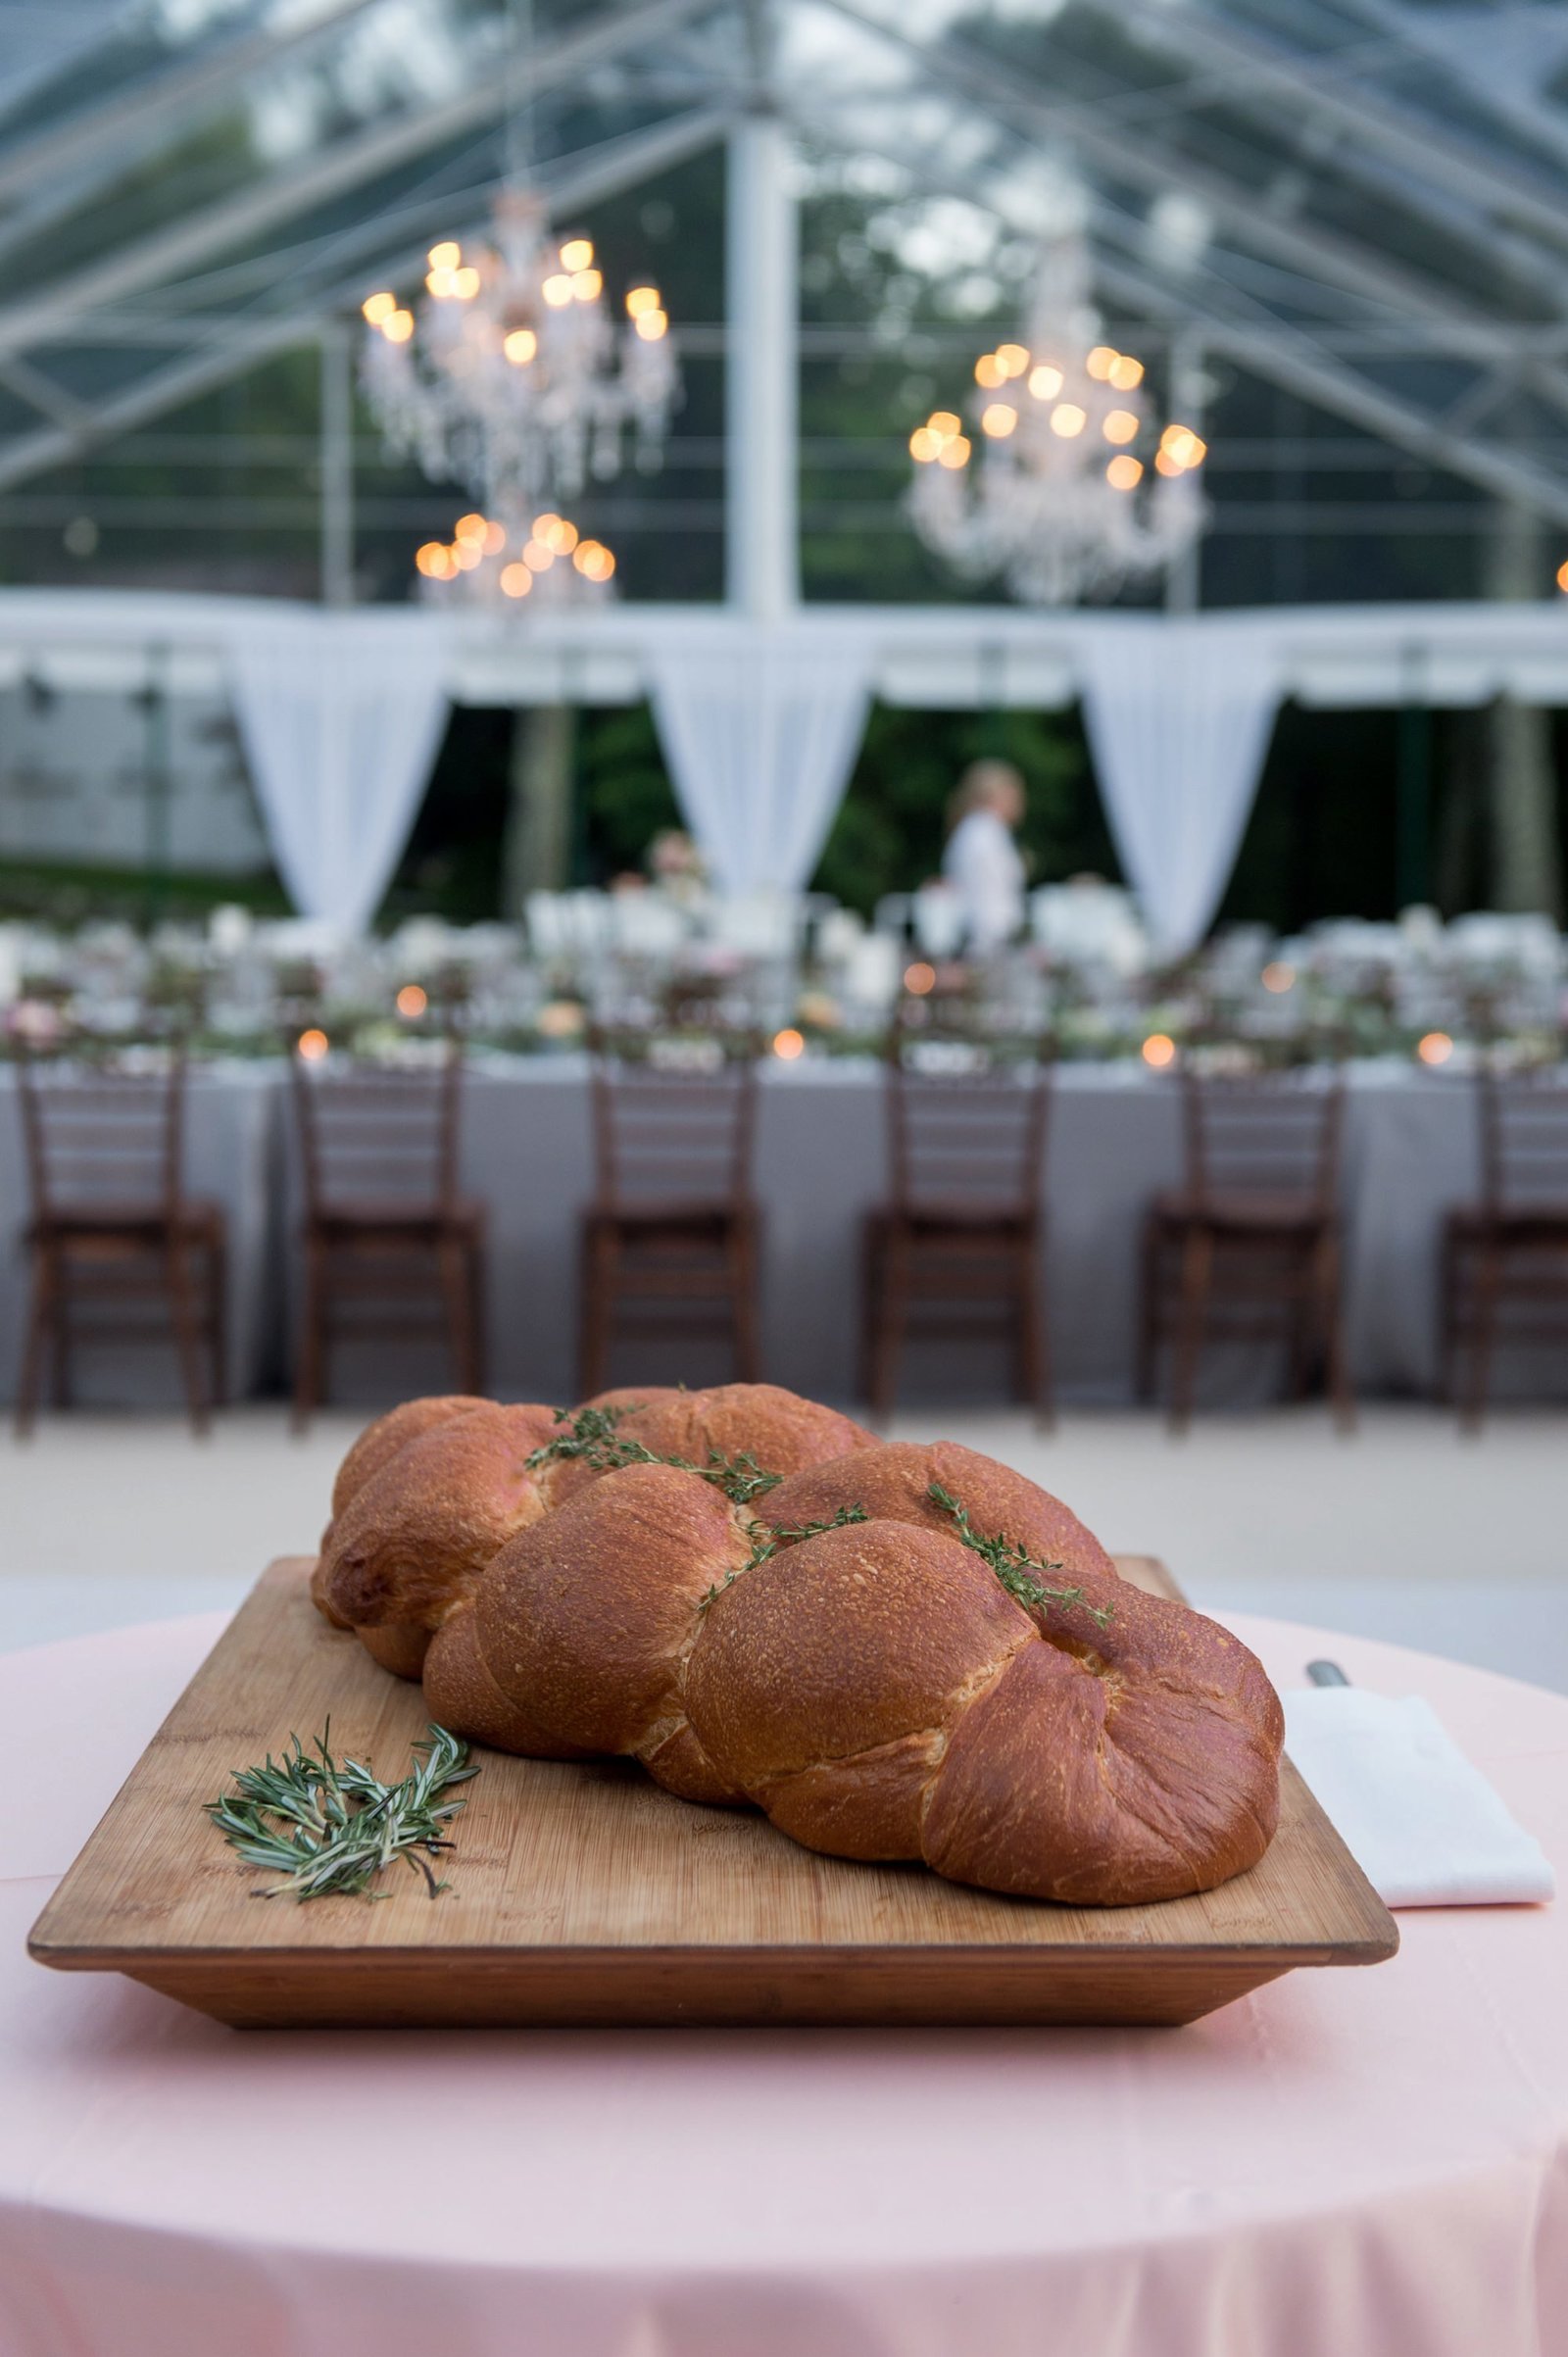 Clear top tented wedding challah bread in Washington, CT